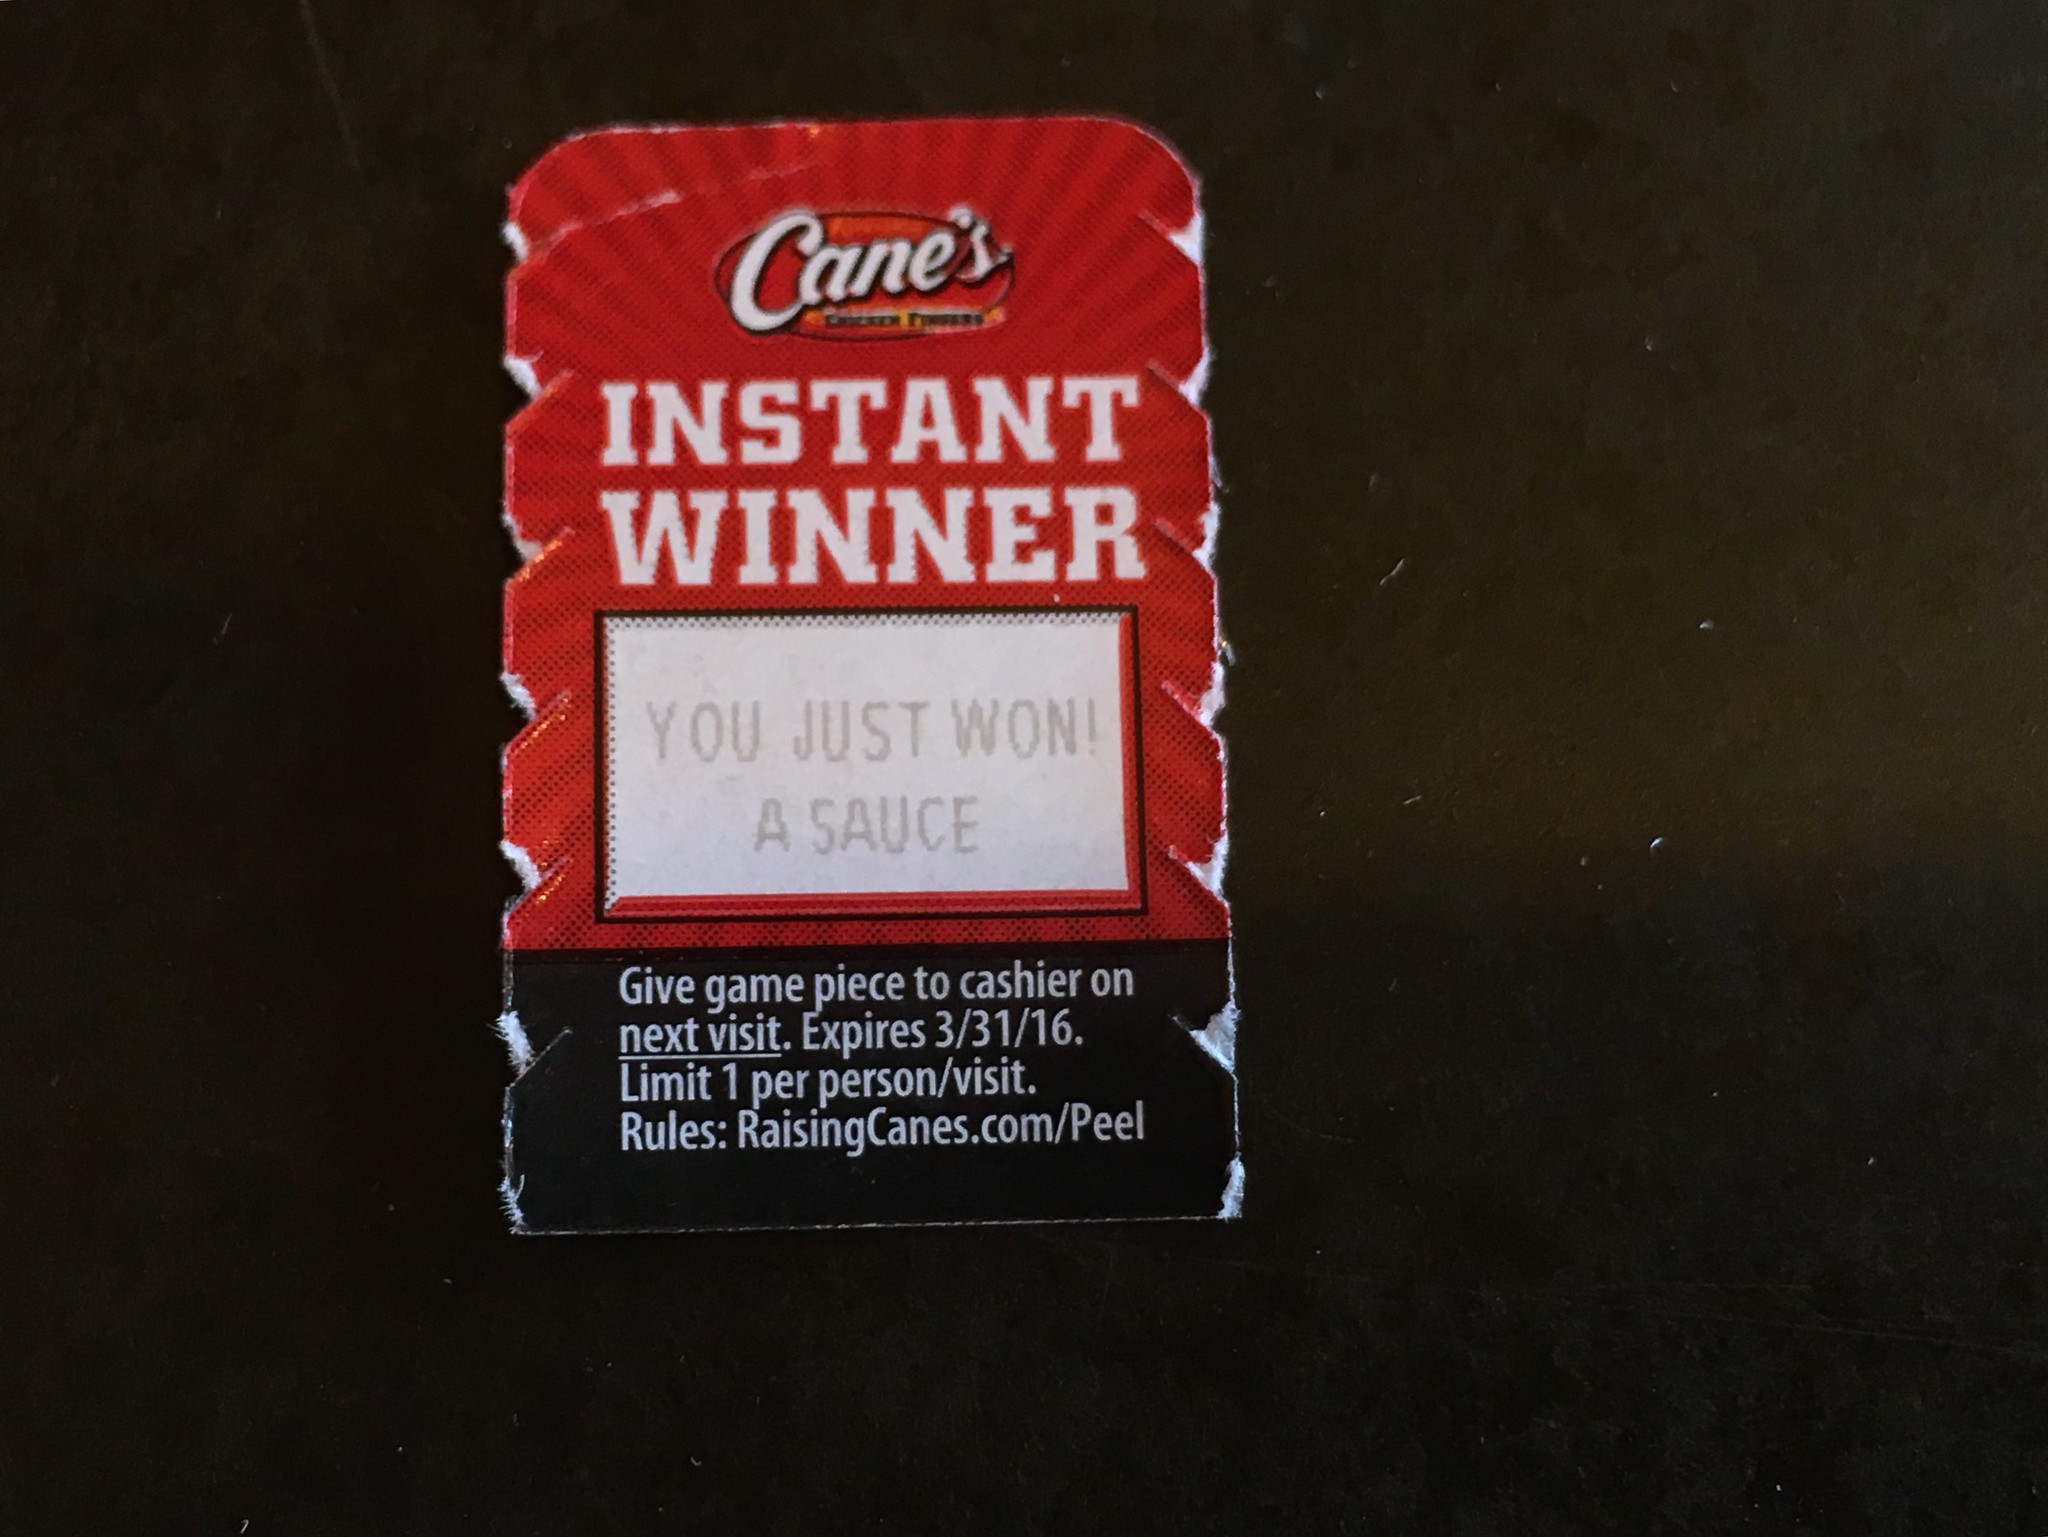 A Condiment? Are you telling me I won a $&@:?!/ Condiment?!?